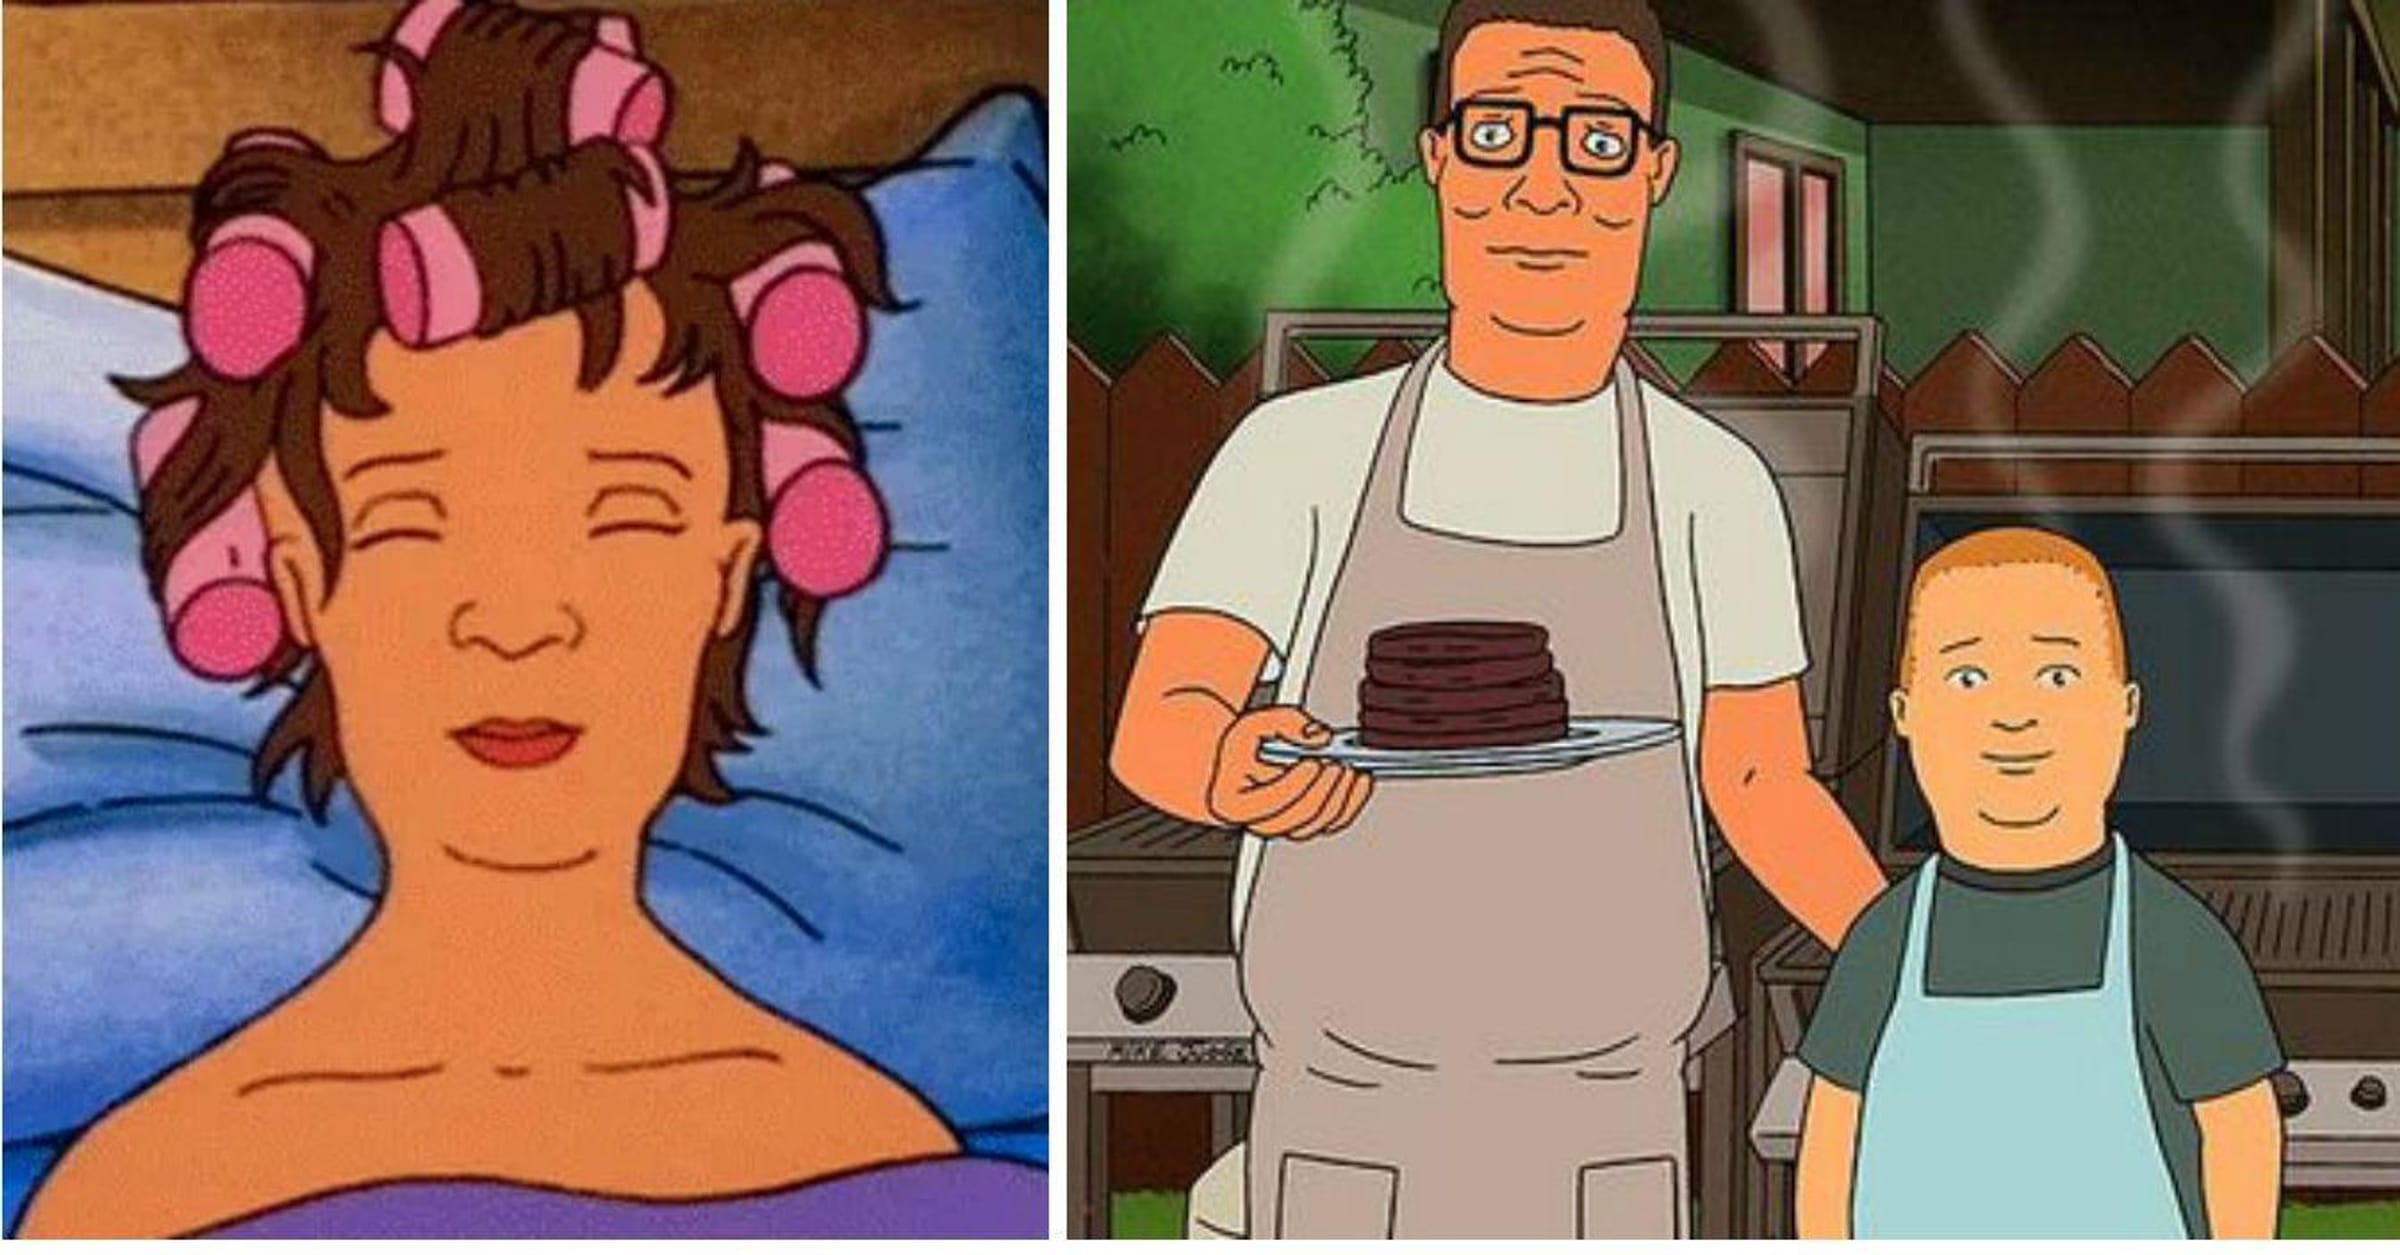 24 Facts About Hank Hill (King Of The Hill) 